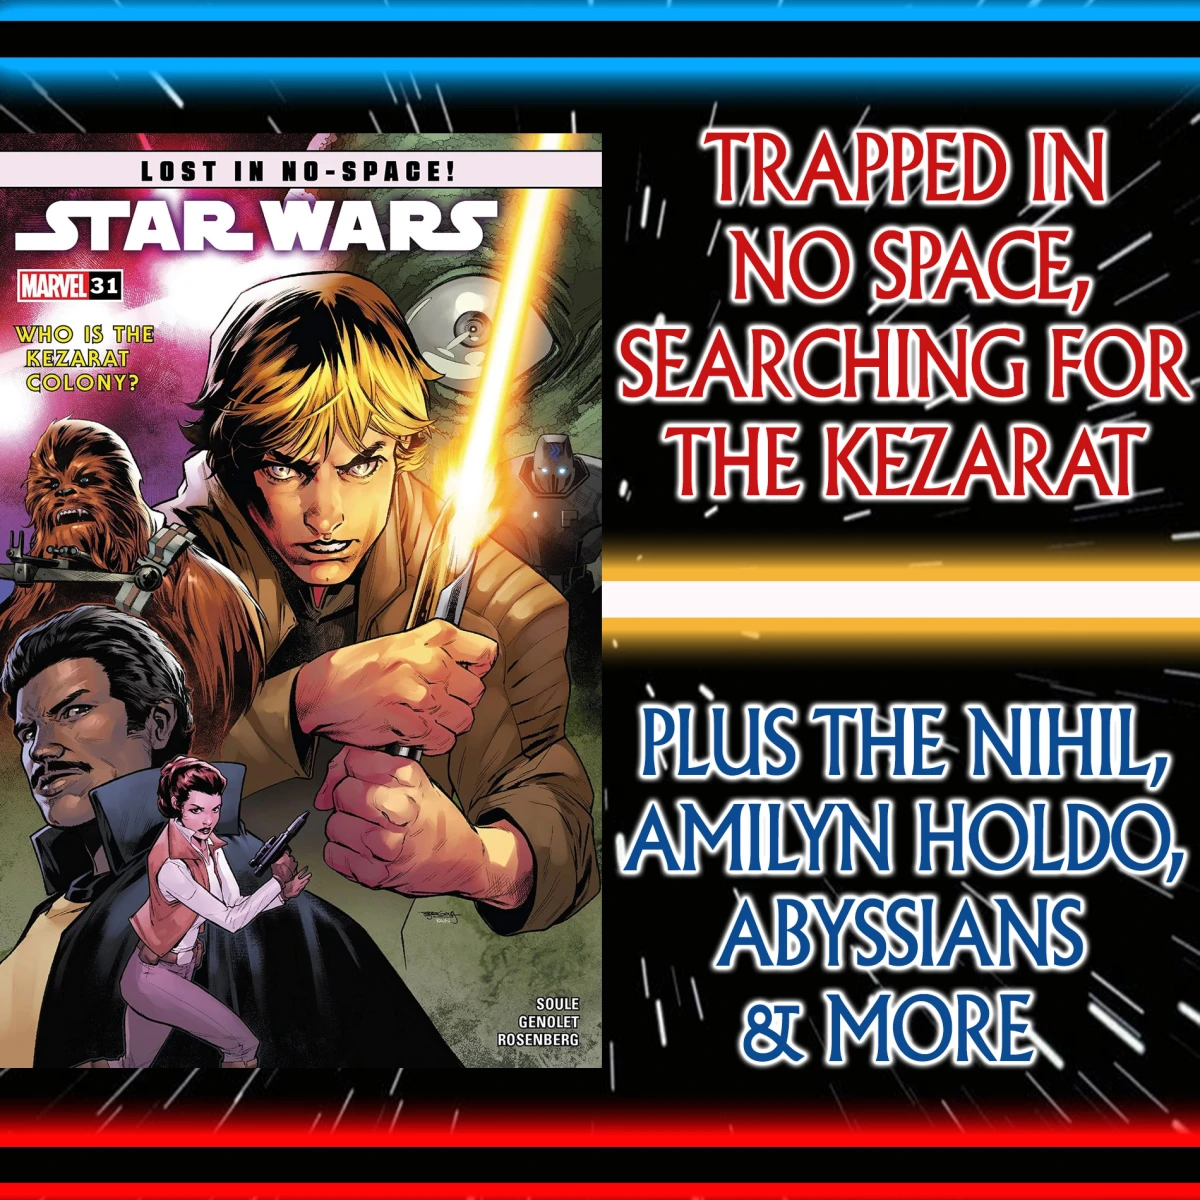 Star Wars: Comics In Canon – SW 2020: Stuck In No Space, Searching For The Kezarat Convoy, Plus Amilyn Holdo, The Nihil, Abyssians & More (Star Wars [2020] Vol 6: 30-33) – Ep 138